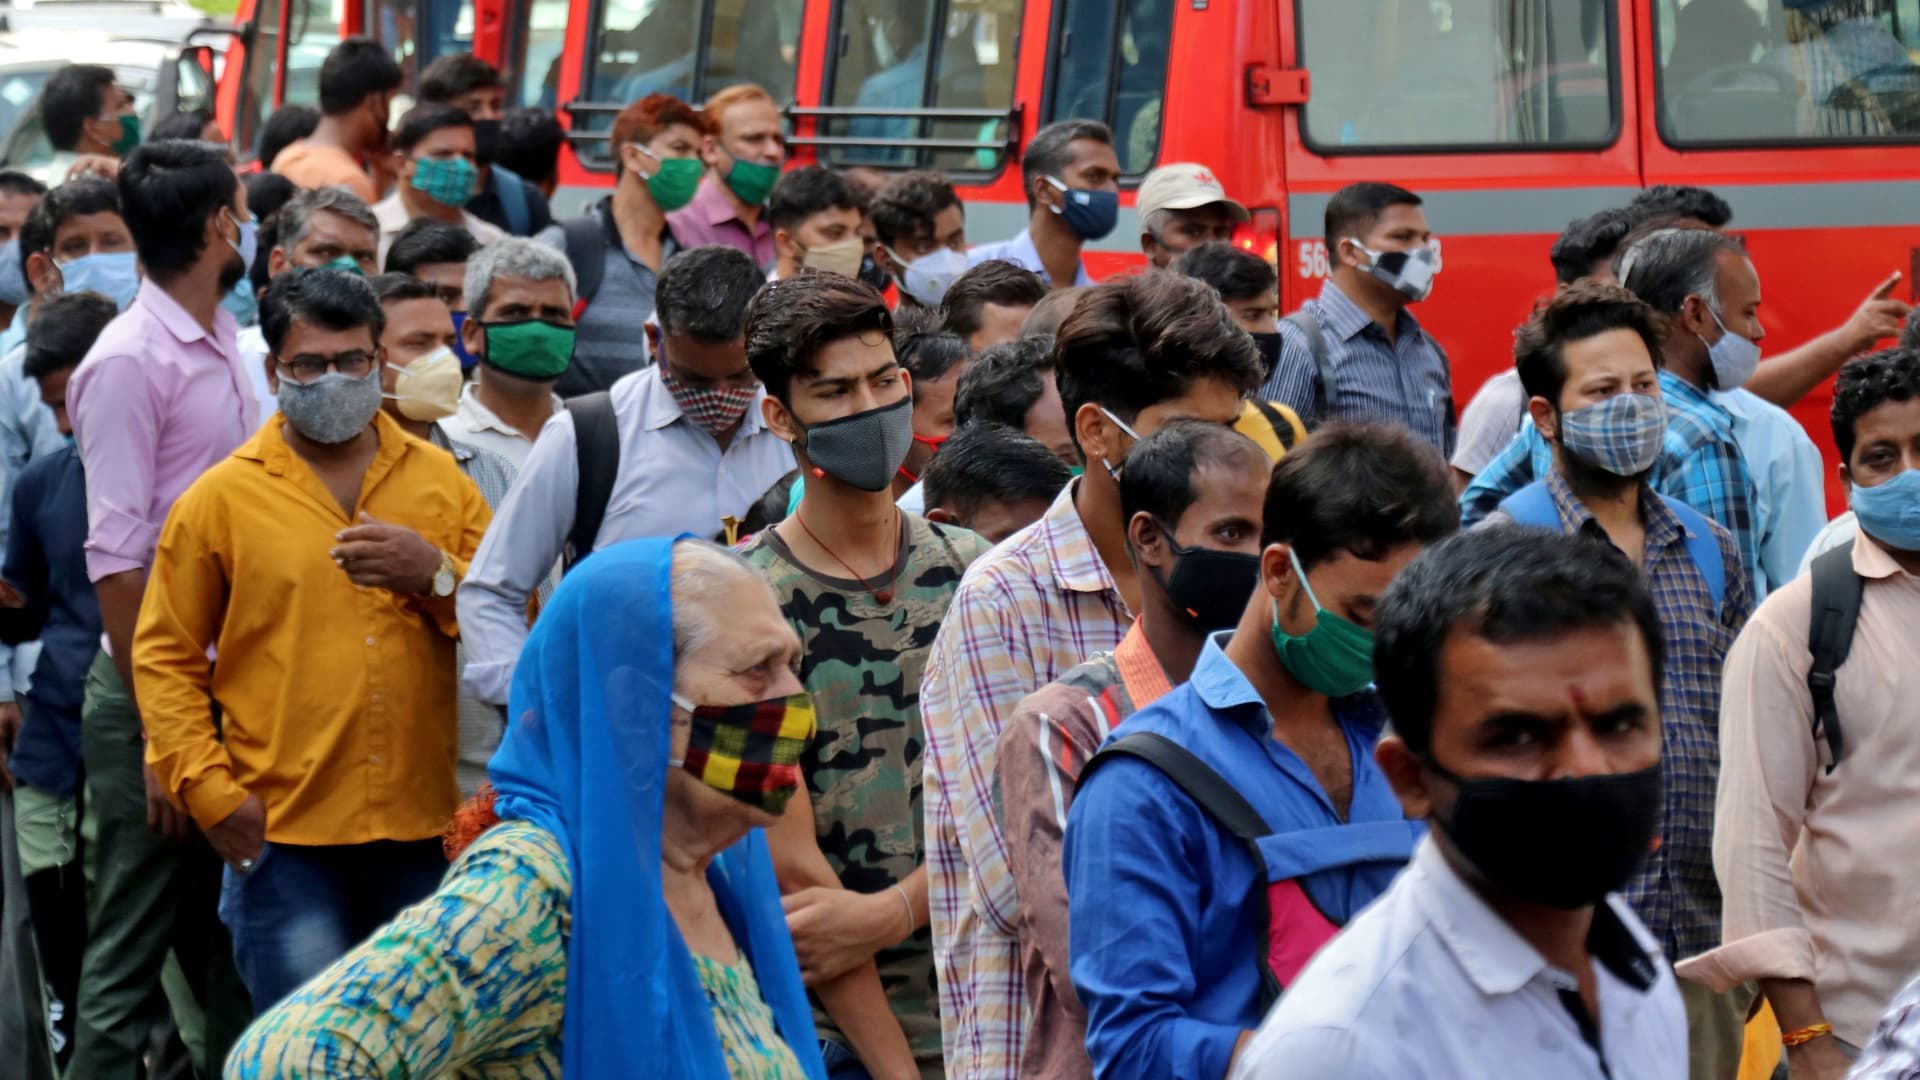 People wait to board passenger buses during rush hour at a bus terminal amidst the spread of the coronavirus disease (COVID-19), in Mumbai, India, April 5, 2021.